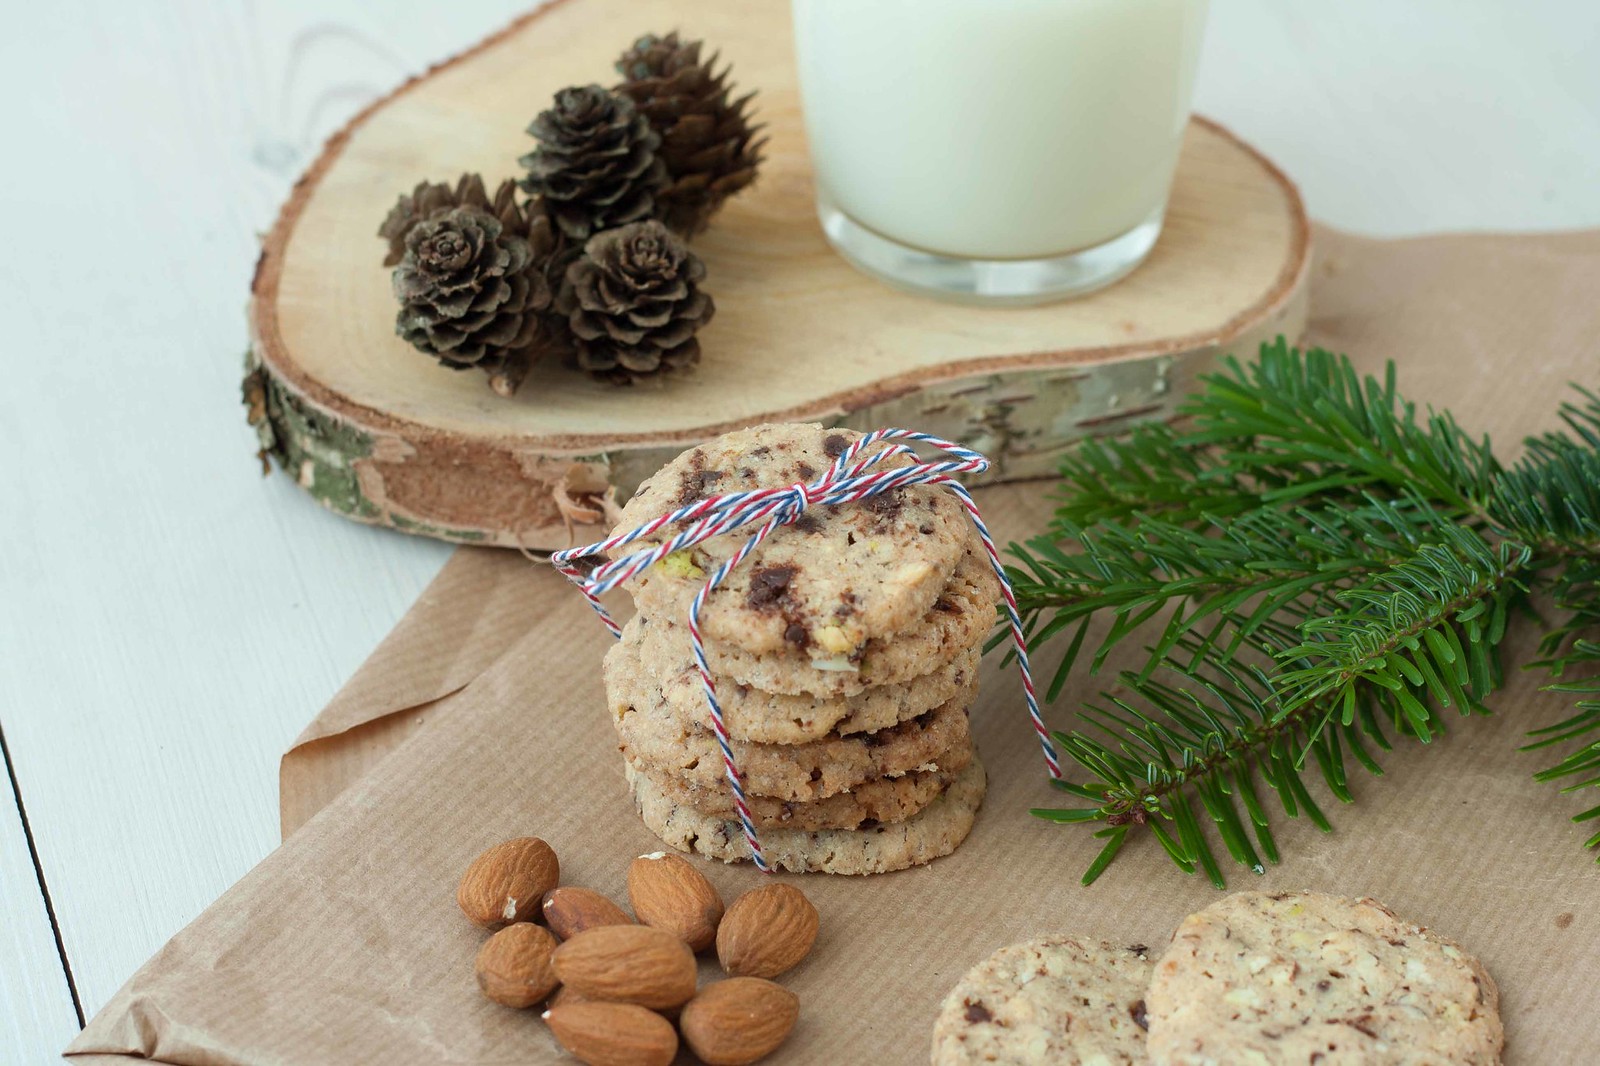 Recipe for Homemade Cookies with Nuts and Chocolate